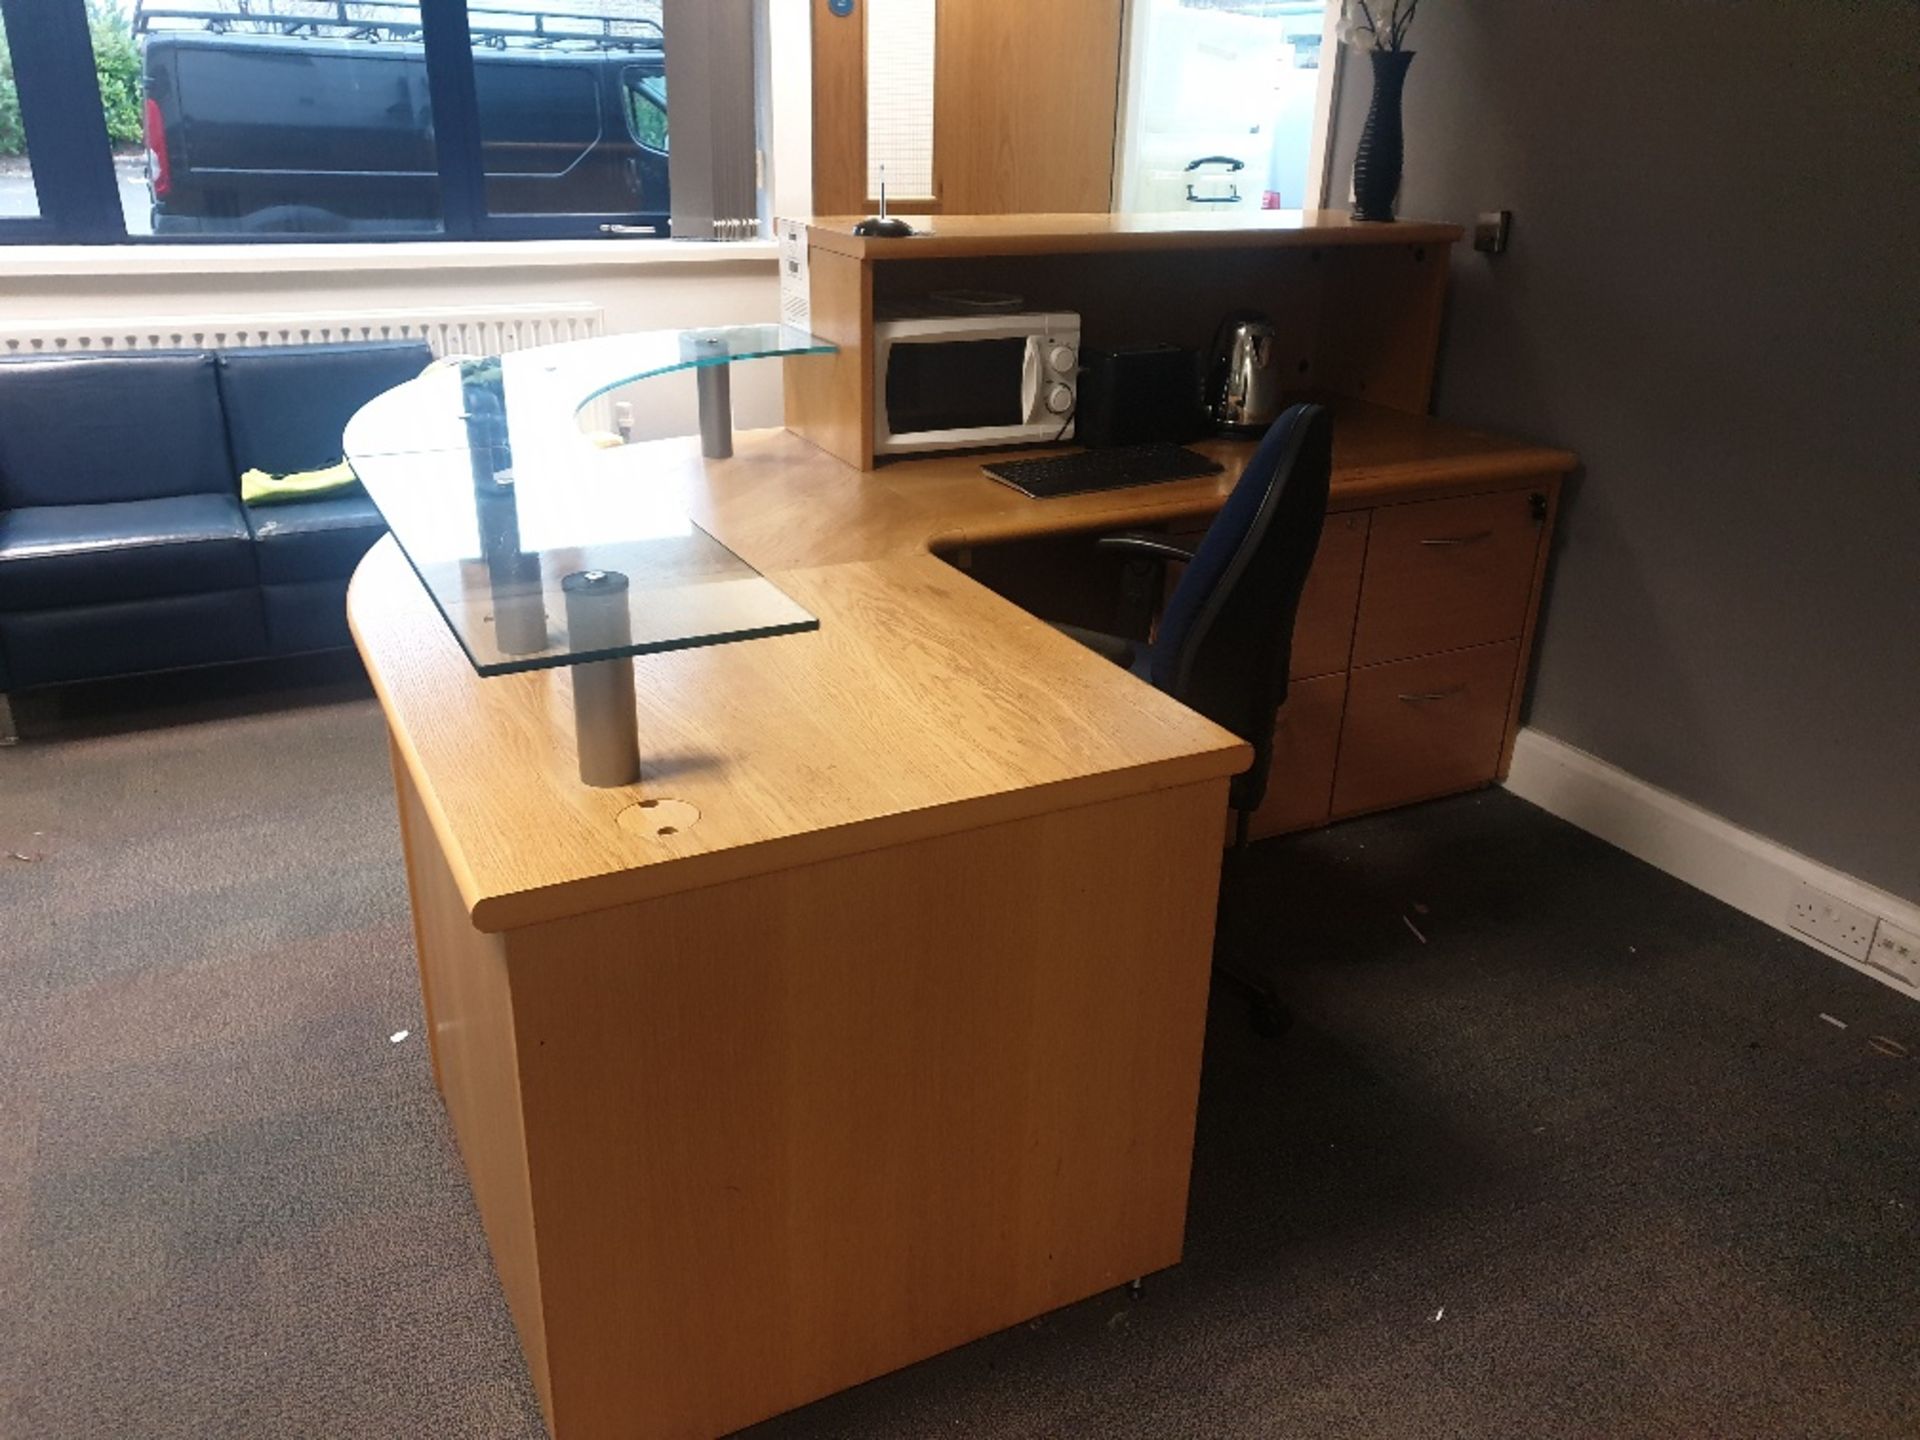 CURVED WOODEN RECEPTION DESK WITH GLASS SHELF AND 3 X 2 DRAWER PEDASTALS, DARK BLUE OFFICE CHAIR, - Image 2 of 3